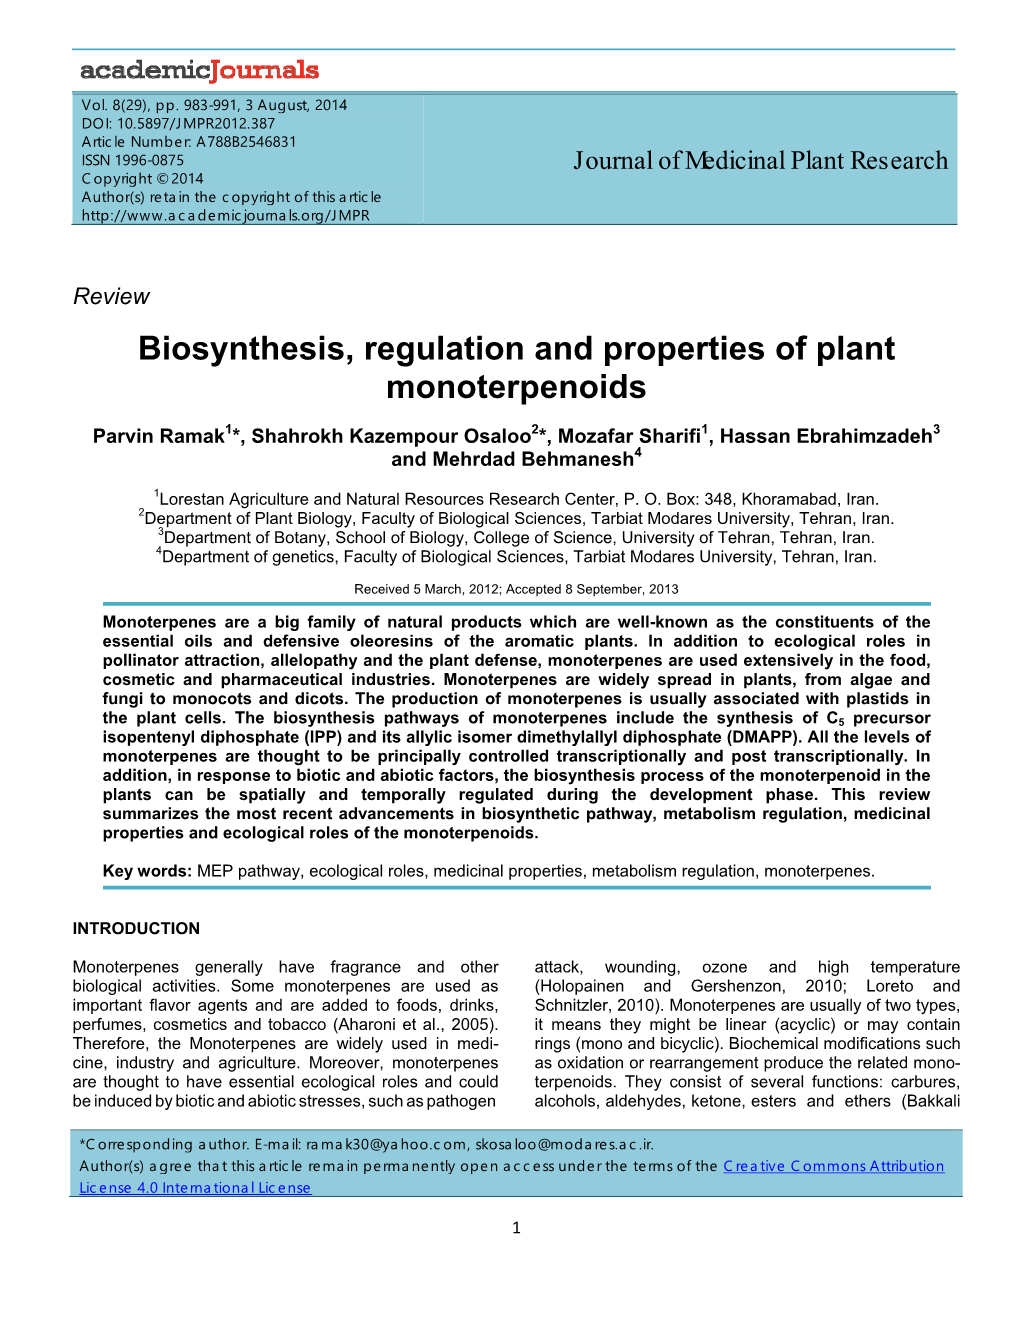 Biosynthesis, Regulation and Properties of Plant Monoterpenoids